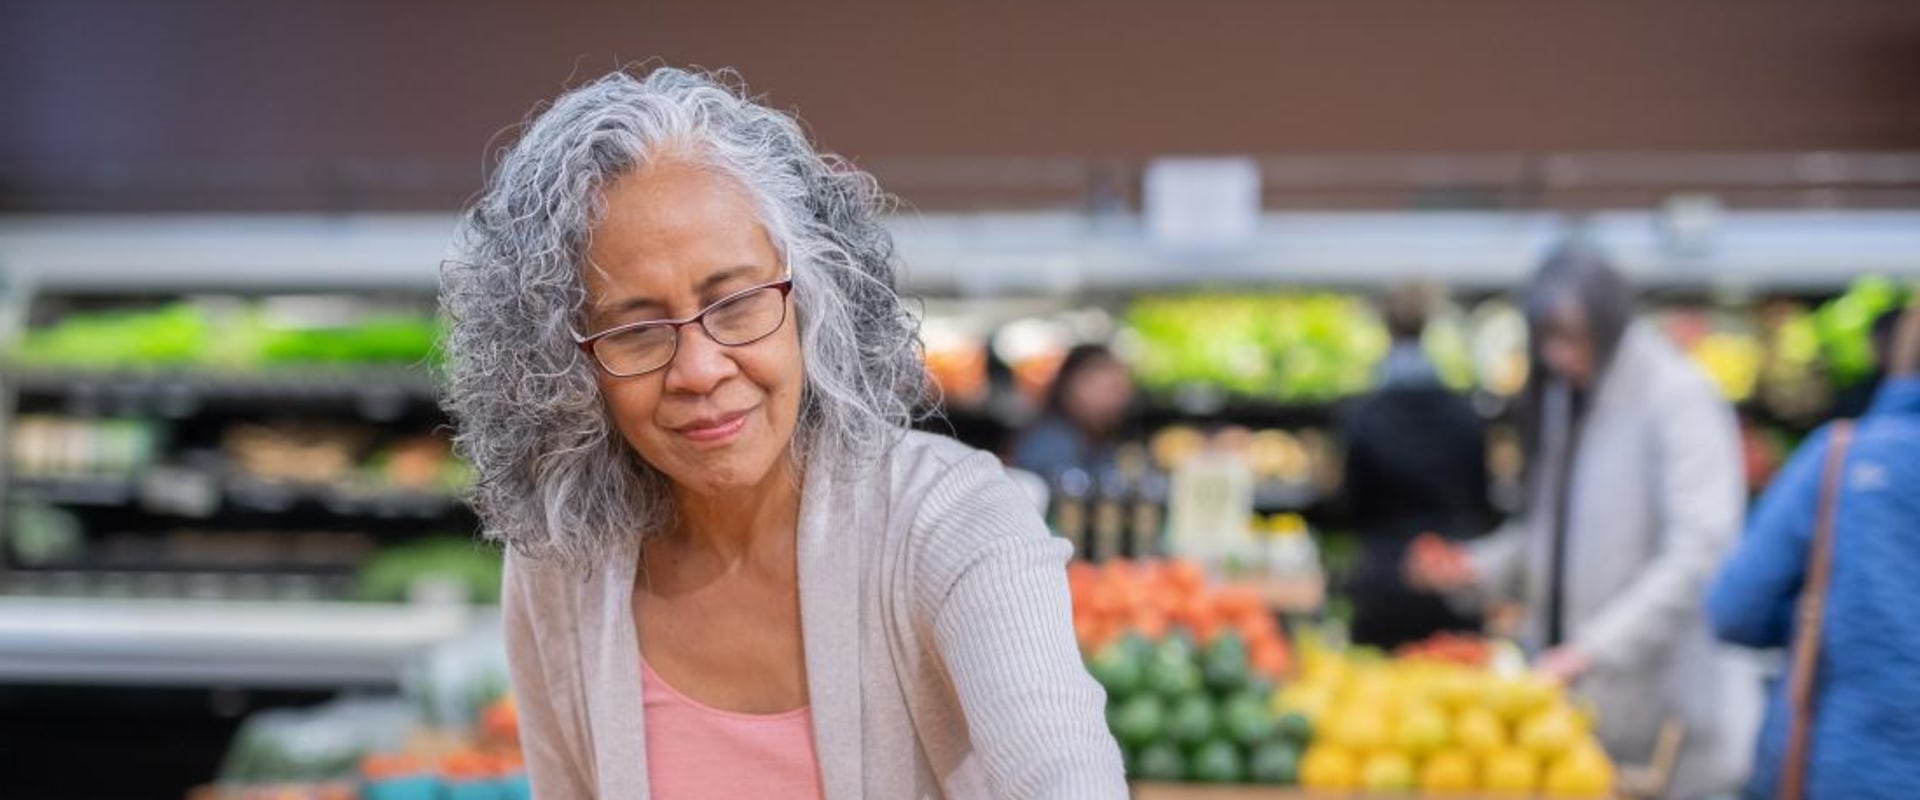 Overcome Grocery Shopping Anxiety: Tips to Make it Easier